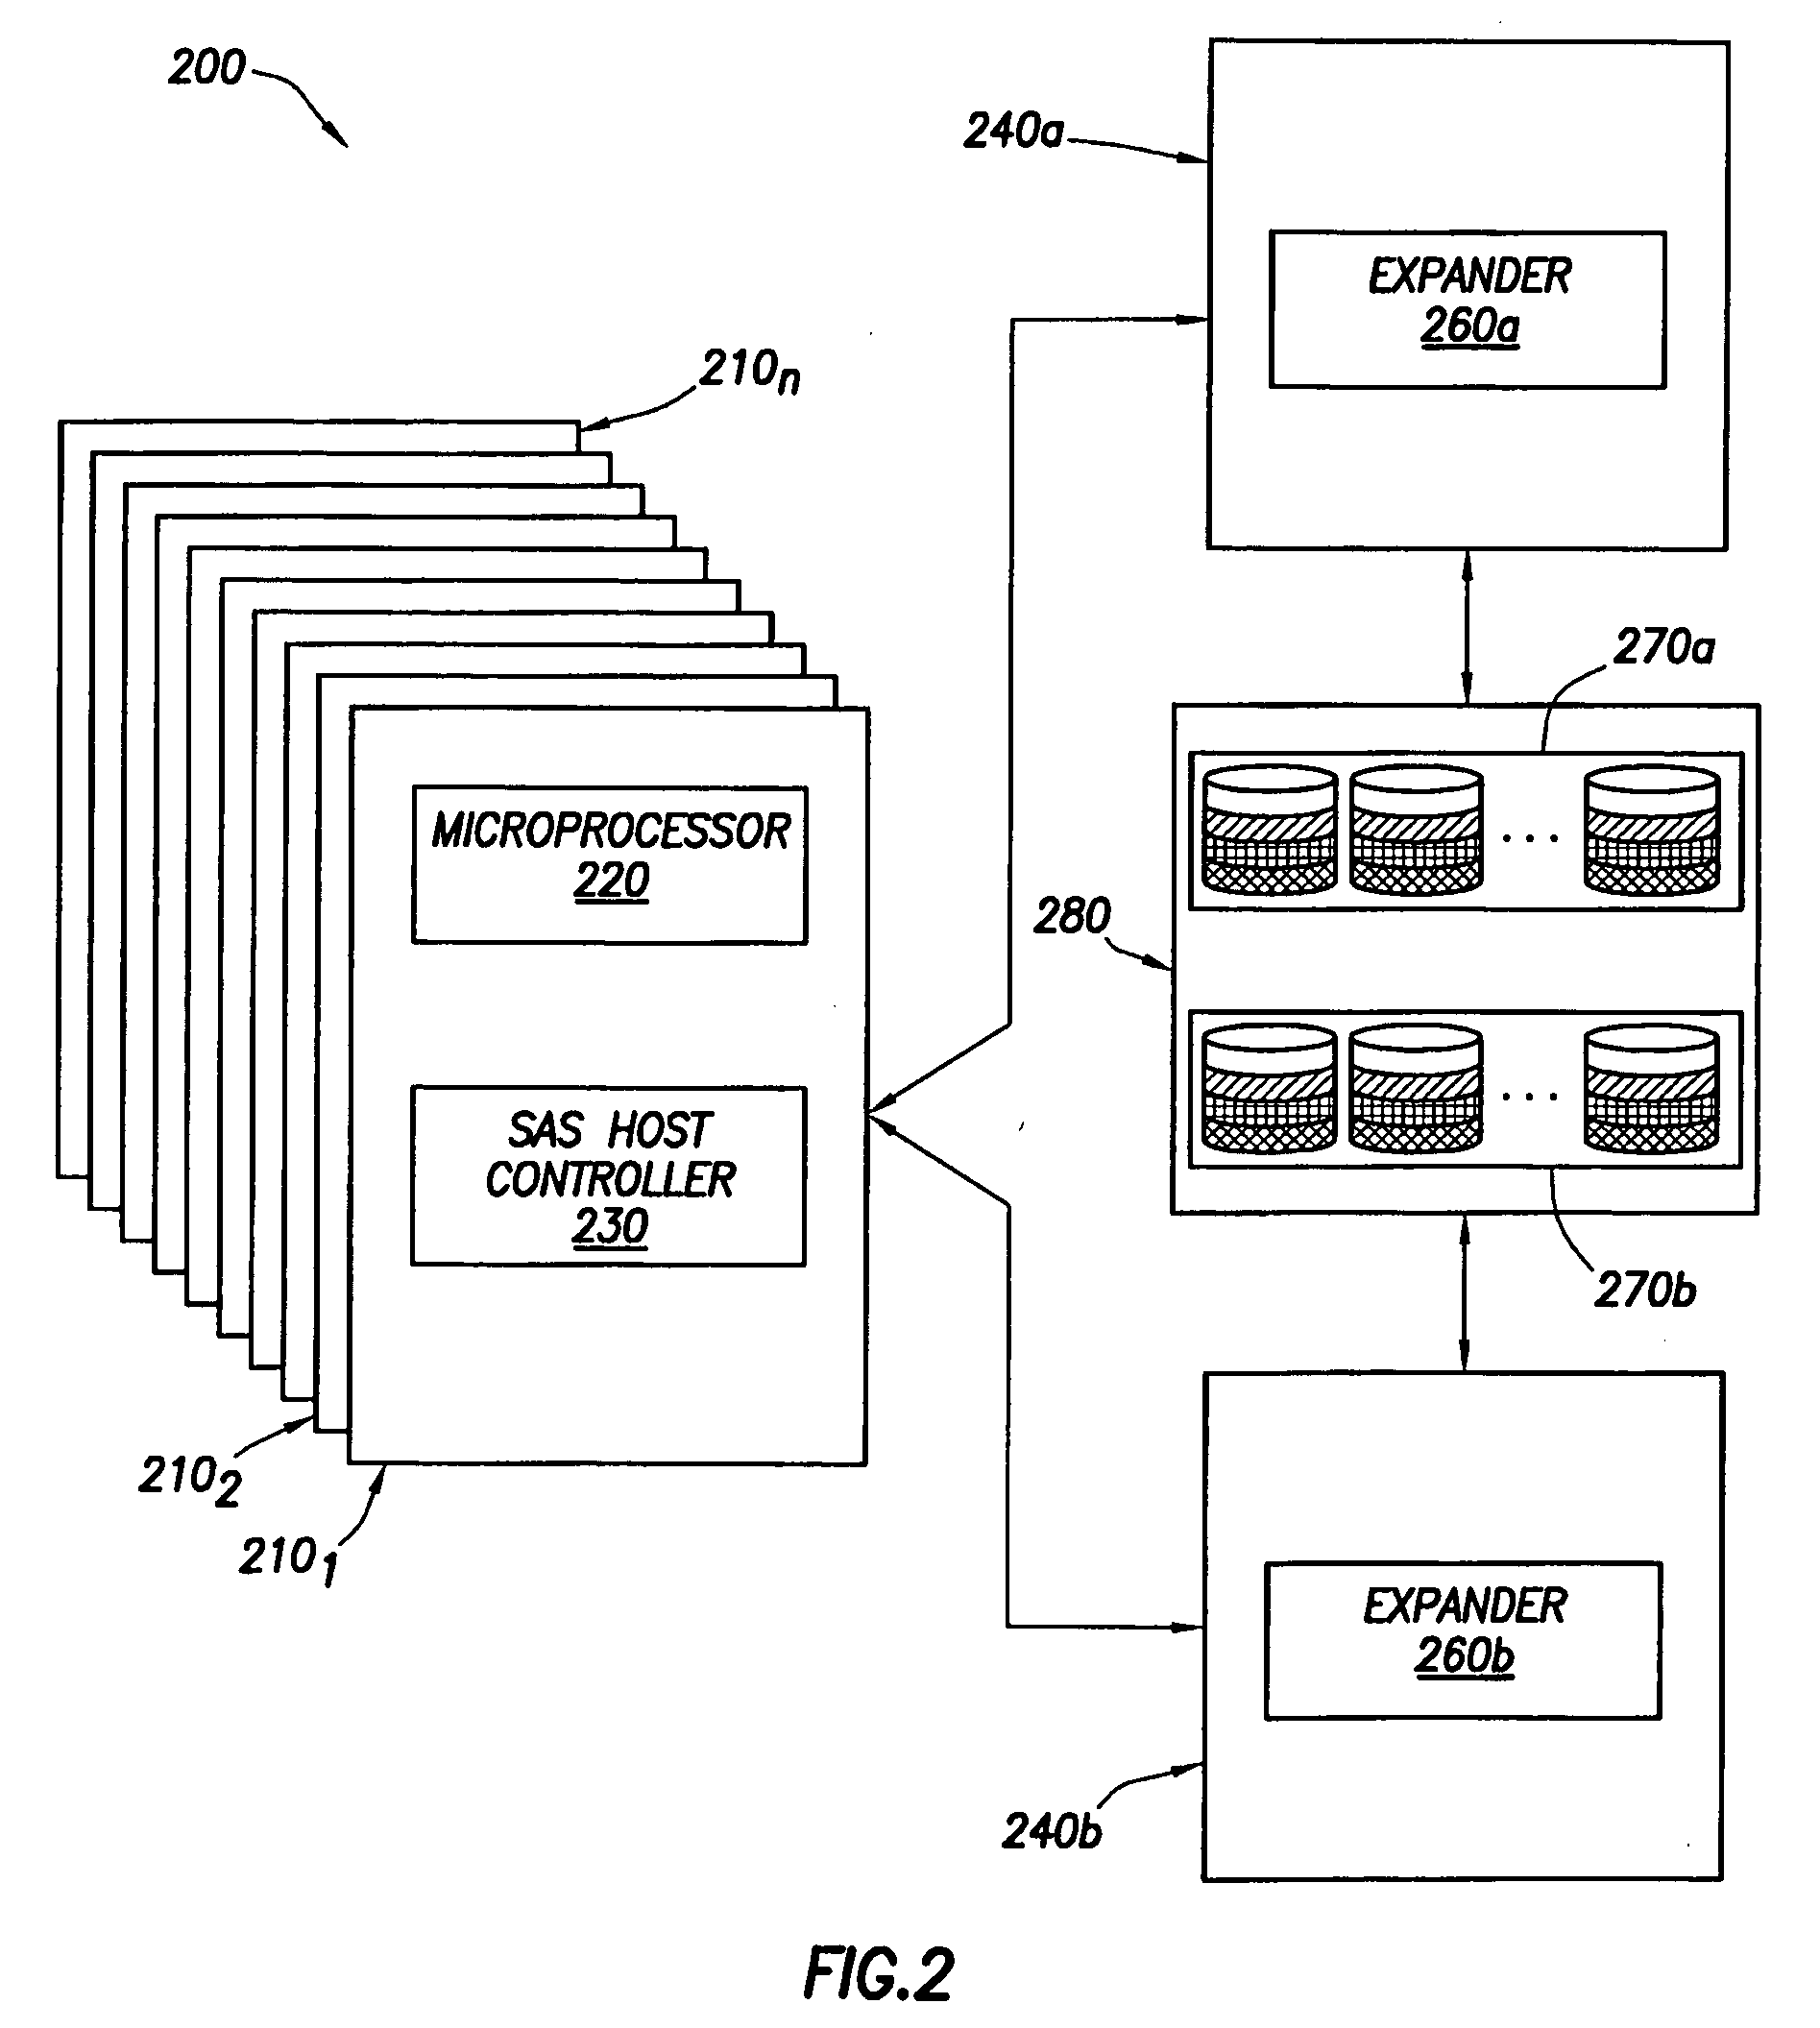 Method for host bus adapter-based storage partitioning and mapping across shared physical drives